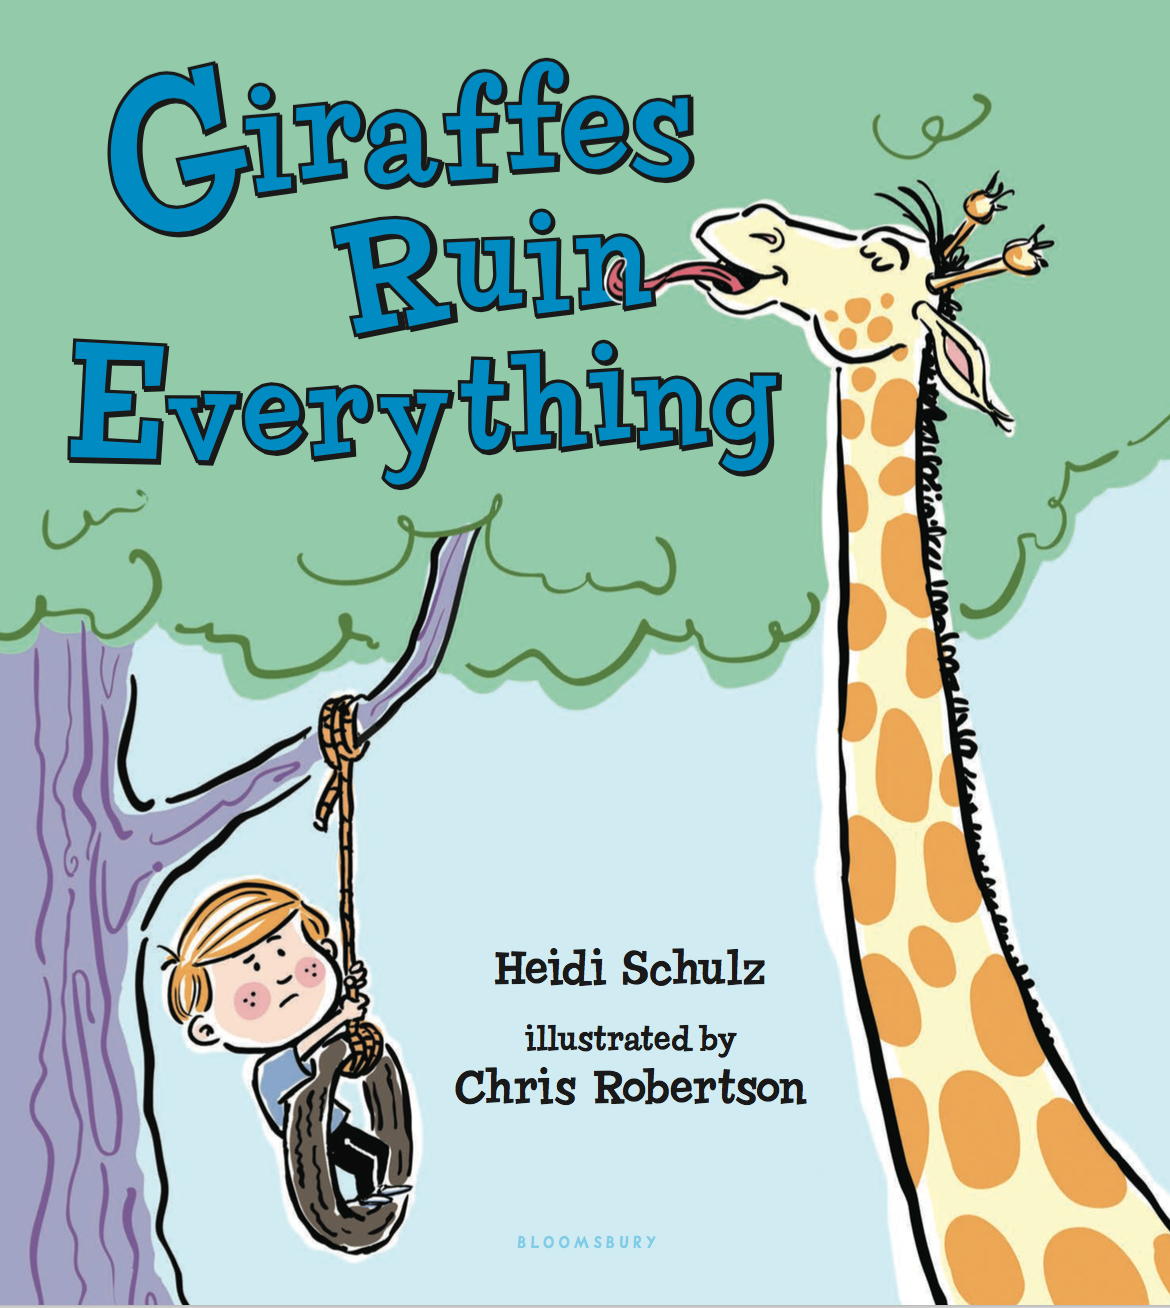 Picture book cover with giraffe and boy on tire swing